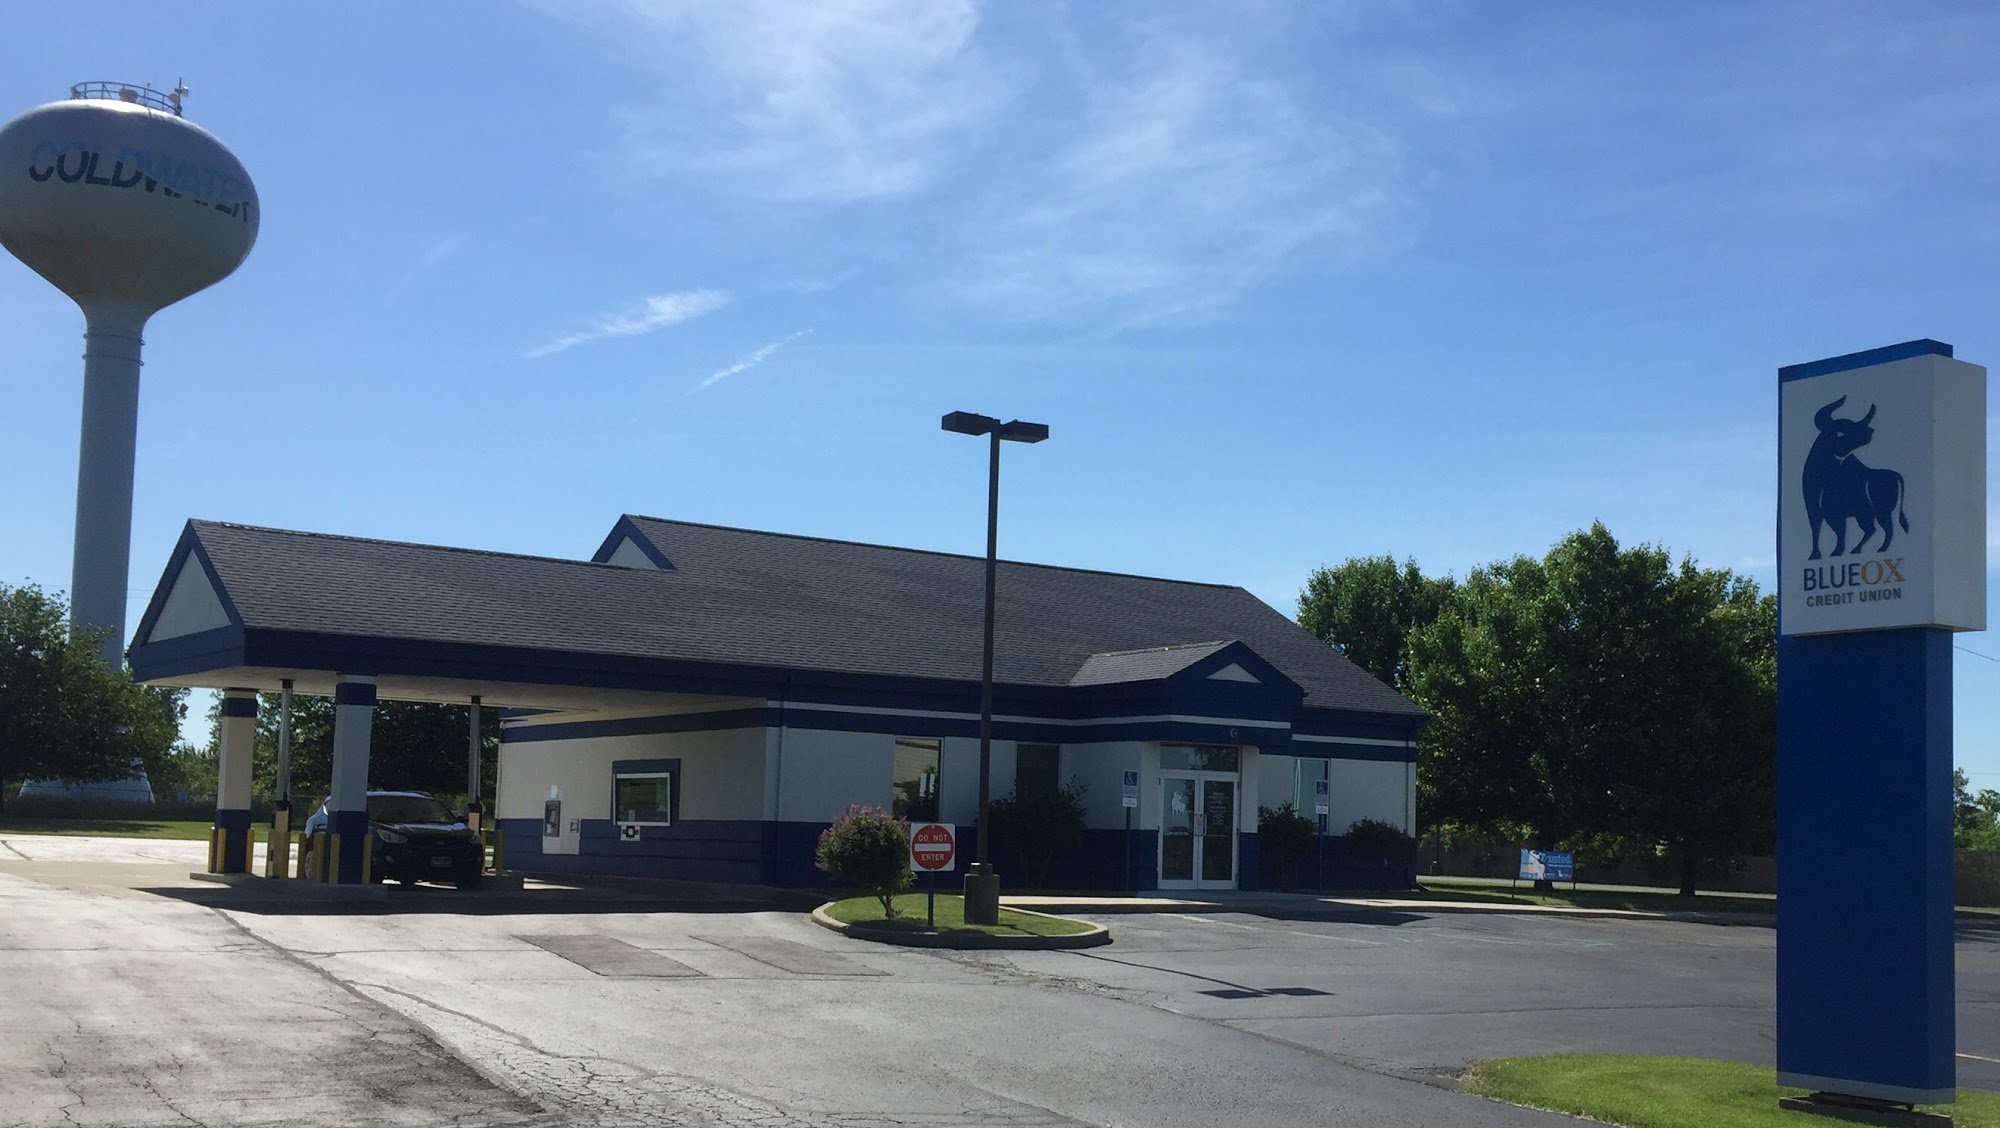 BlueOx Credit Union - Coldwater